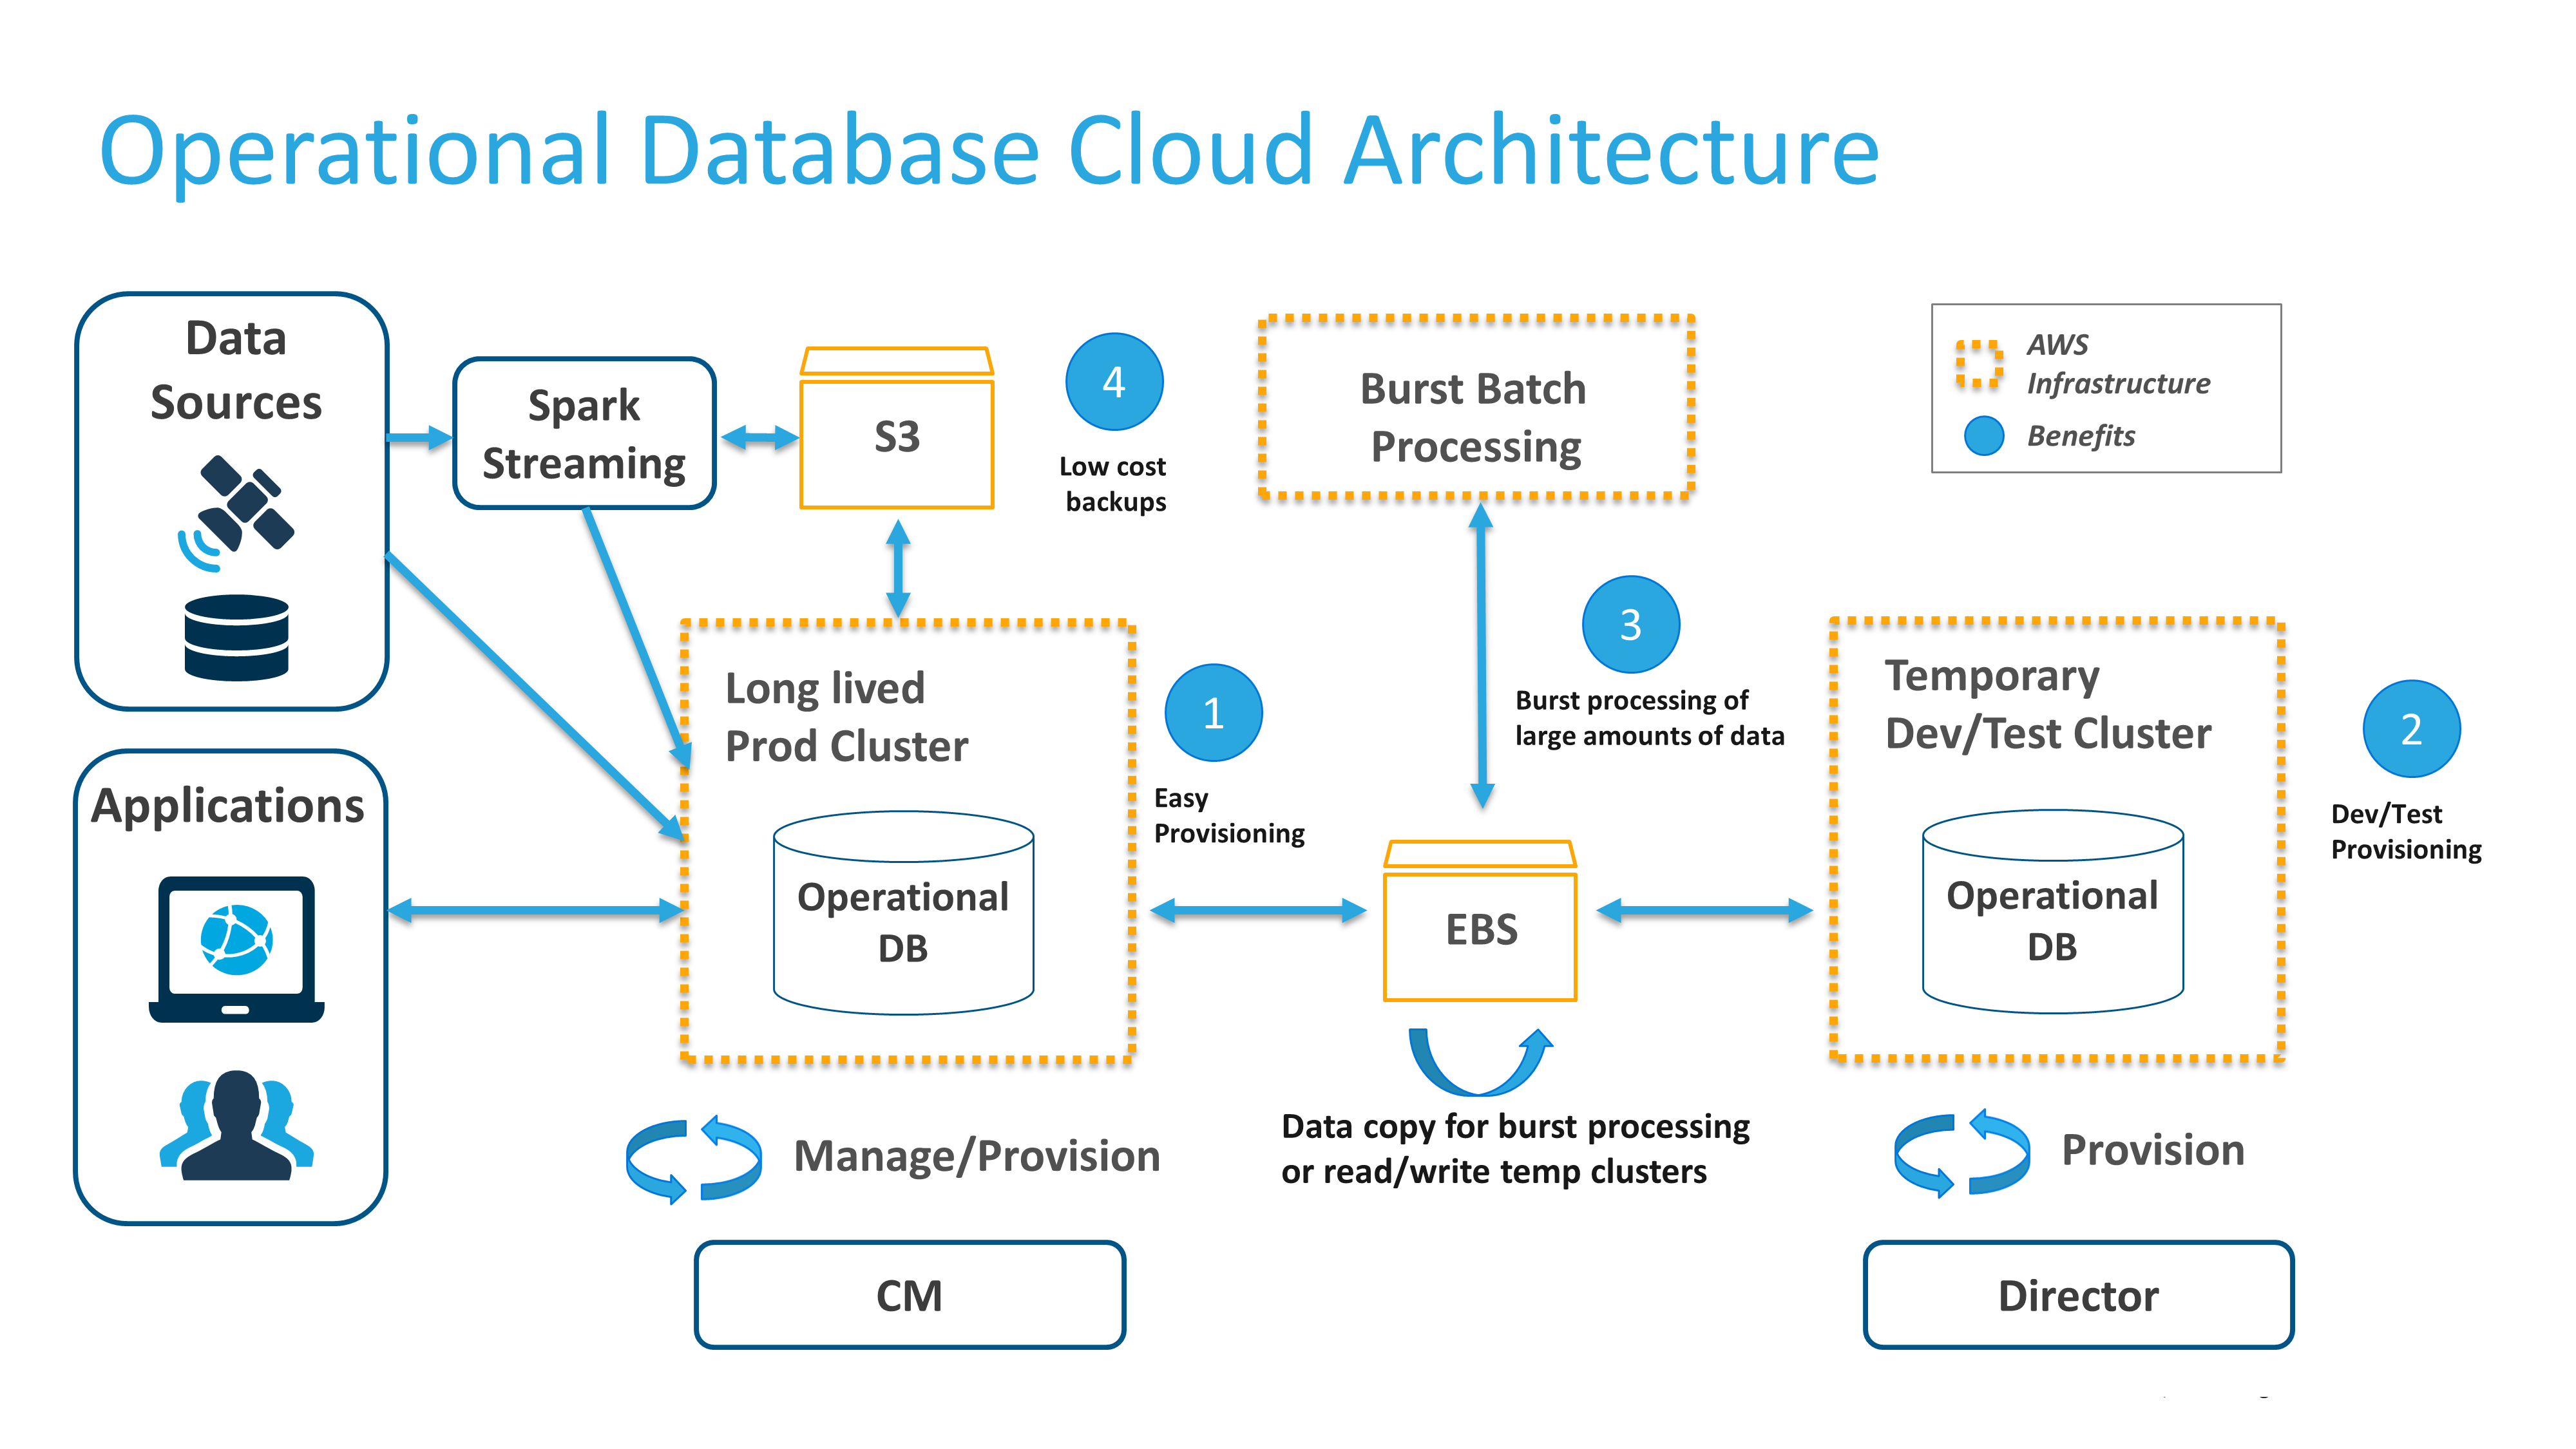 A flow chart displaying an Operational Database Cloud Architecture